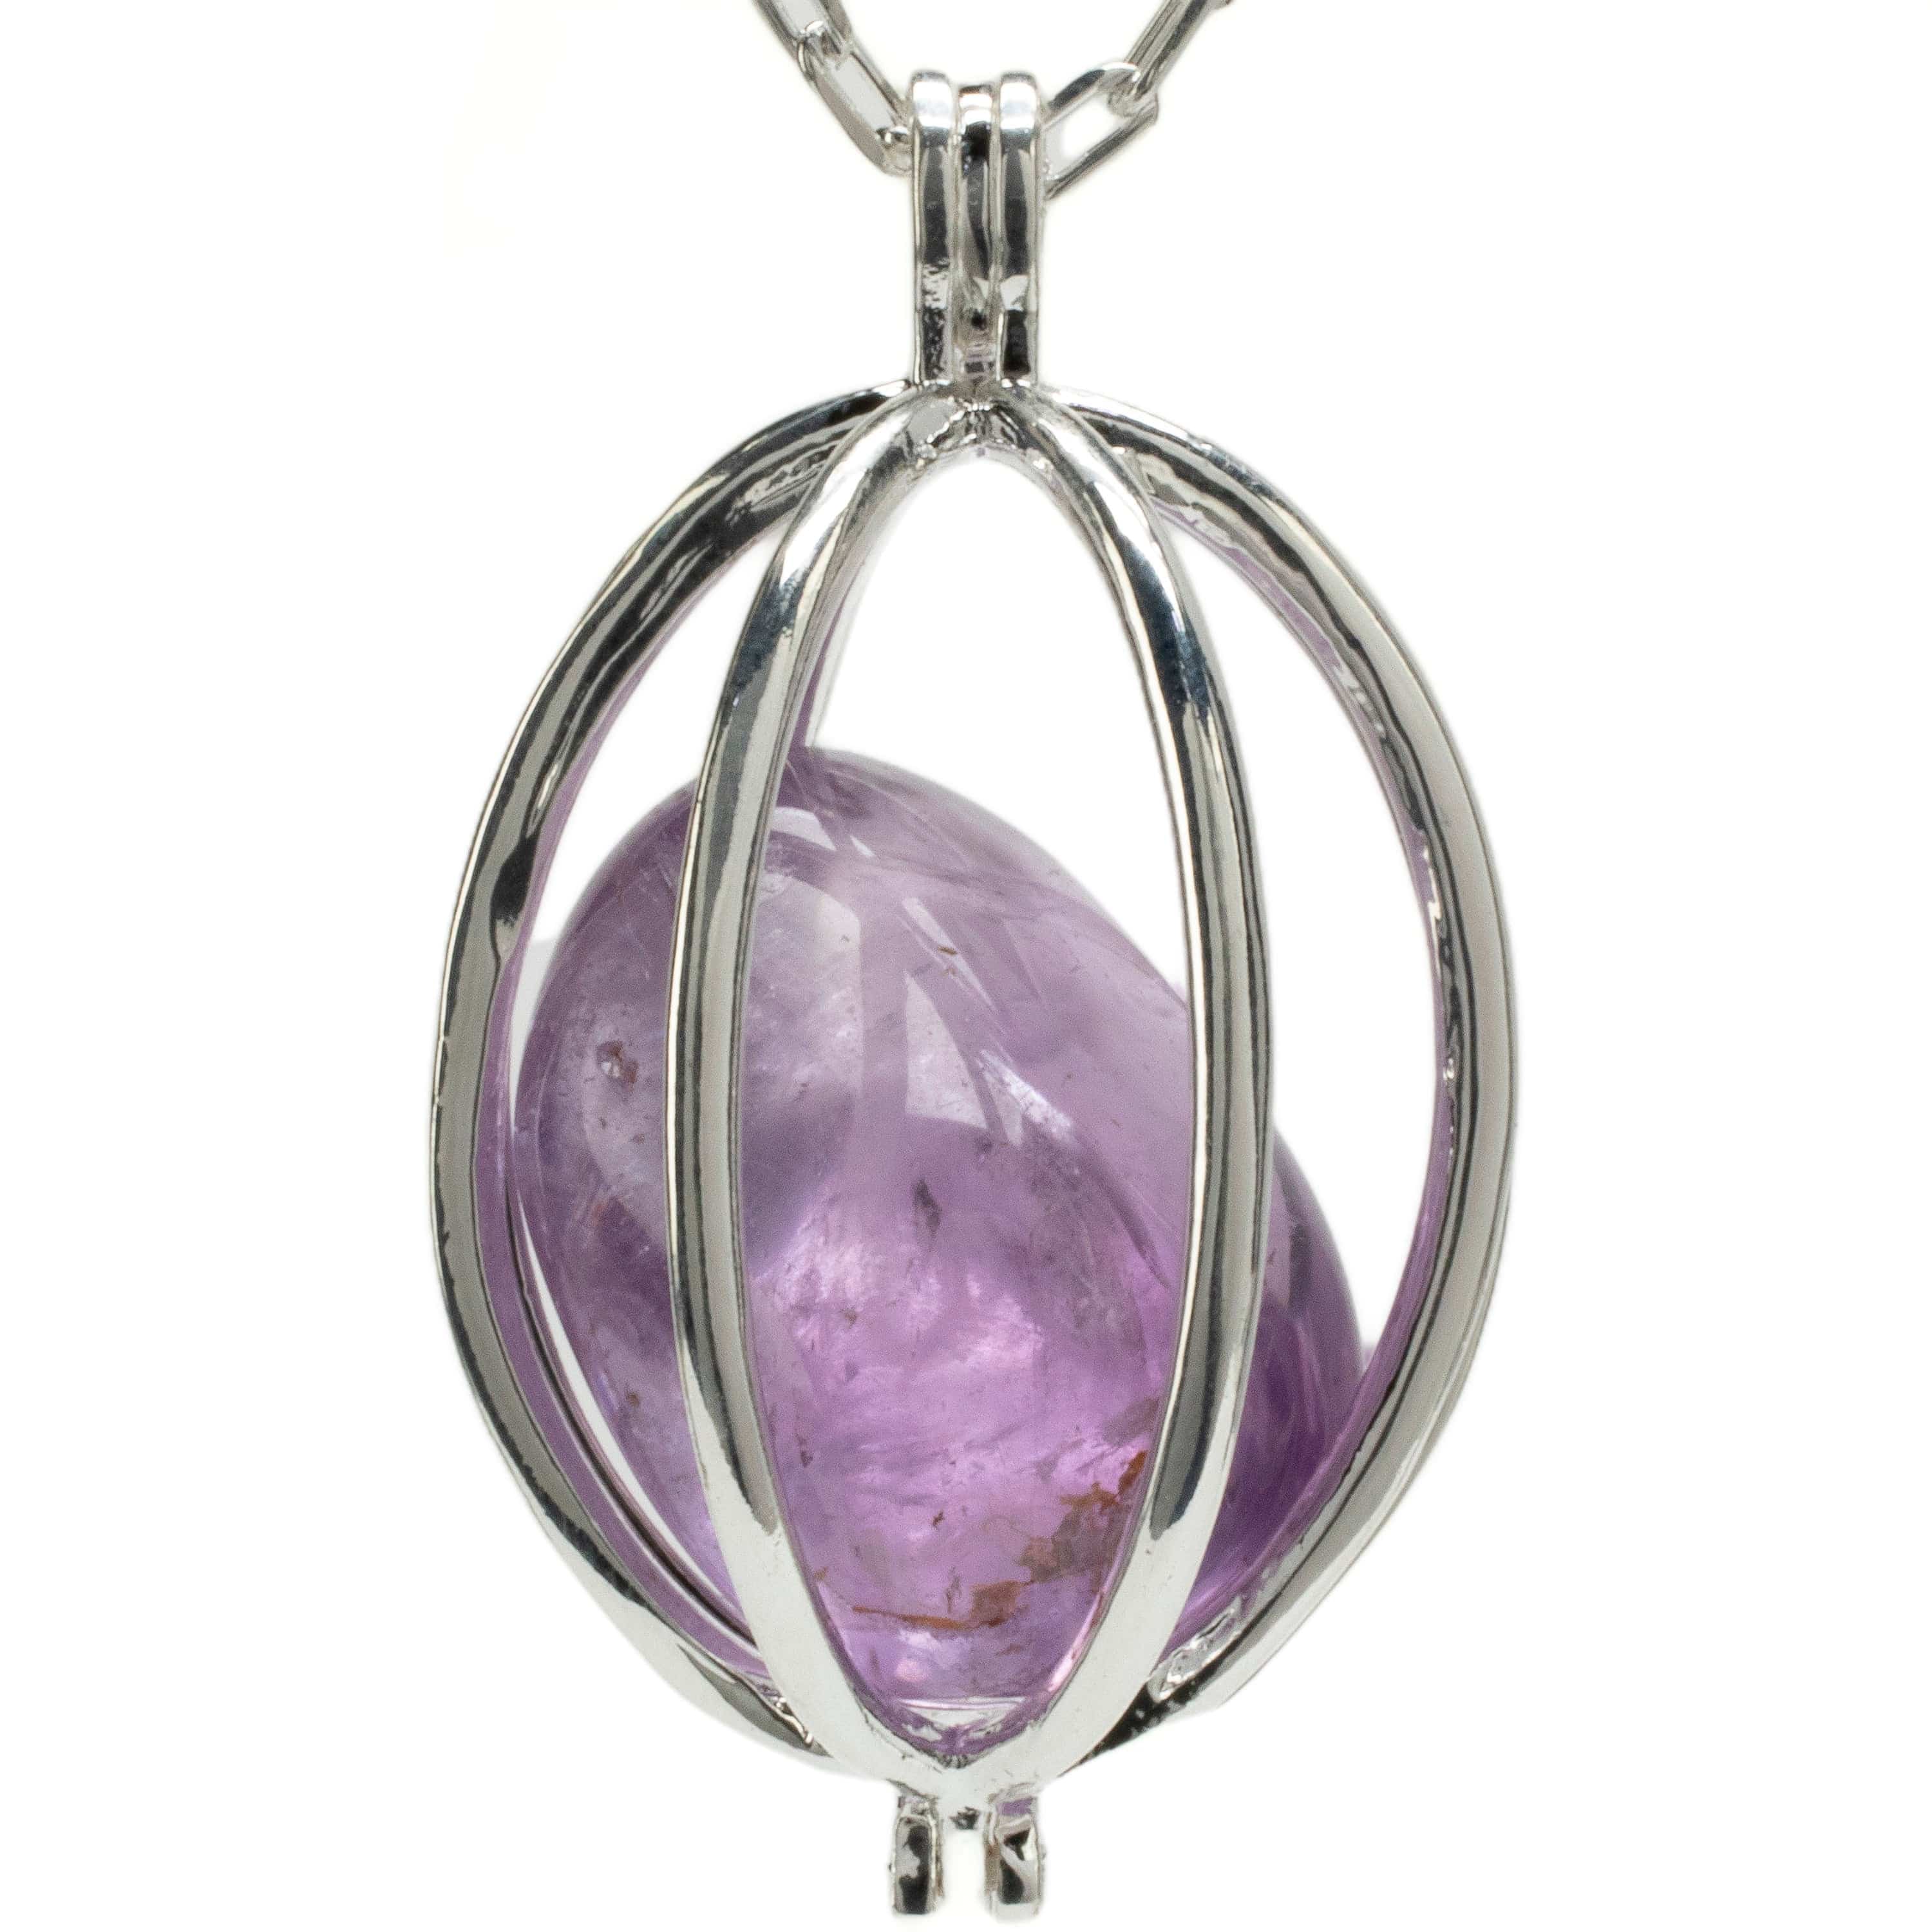 Kalifano Crystal Jewelry Silver Toned Convertible Chakra Pendant with Replaceable Tumbled Stones CJN-2057S-MT